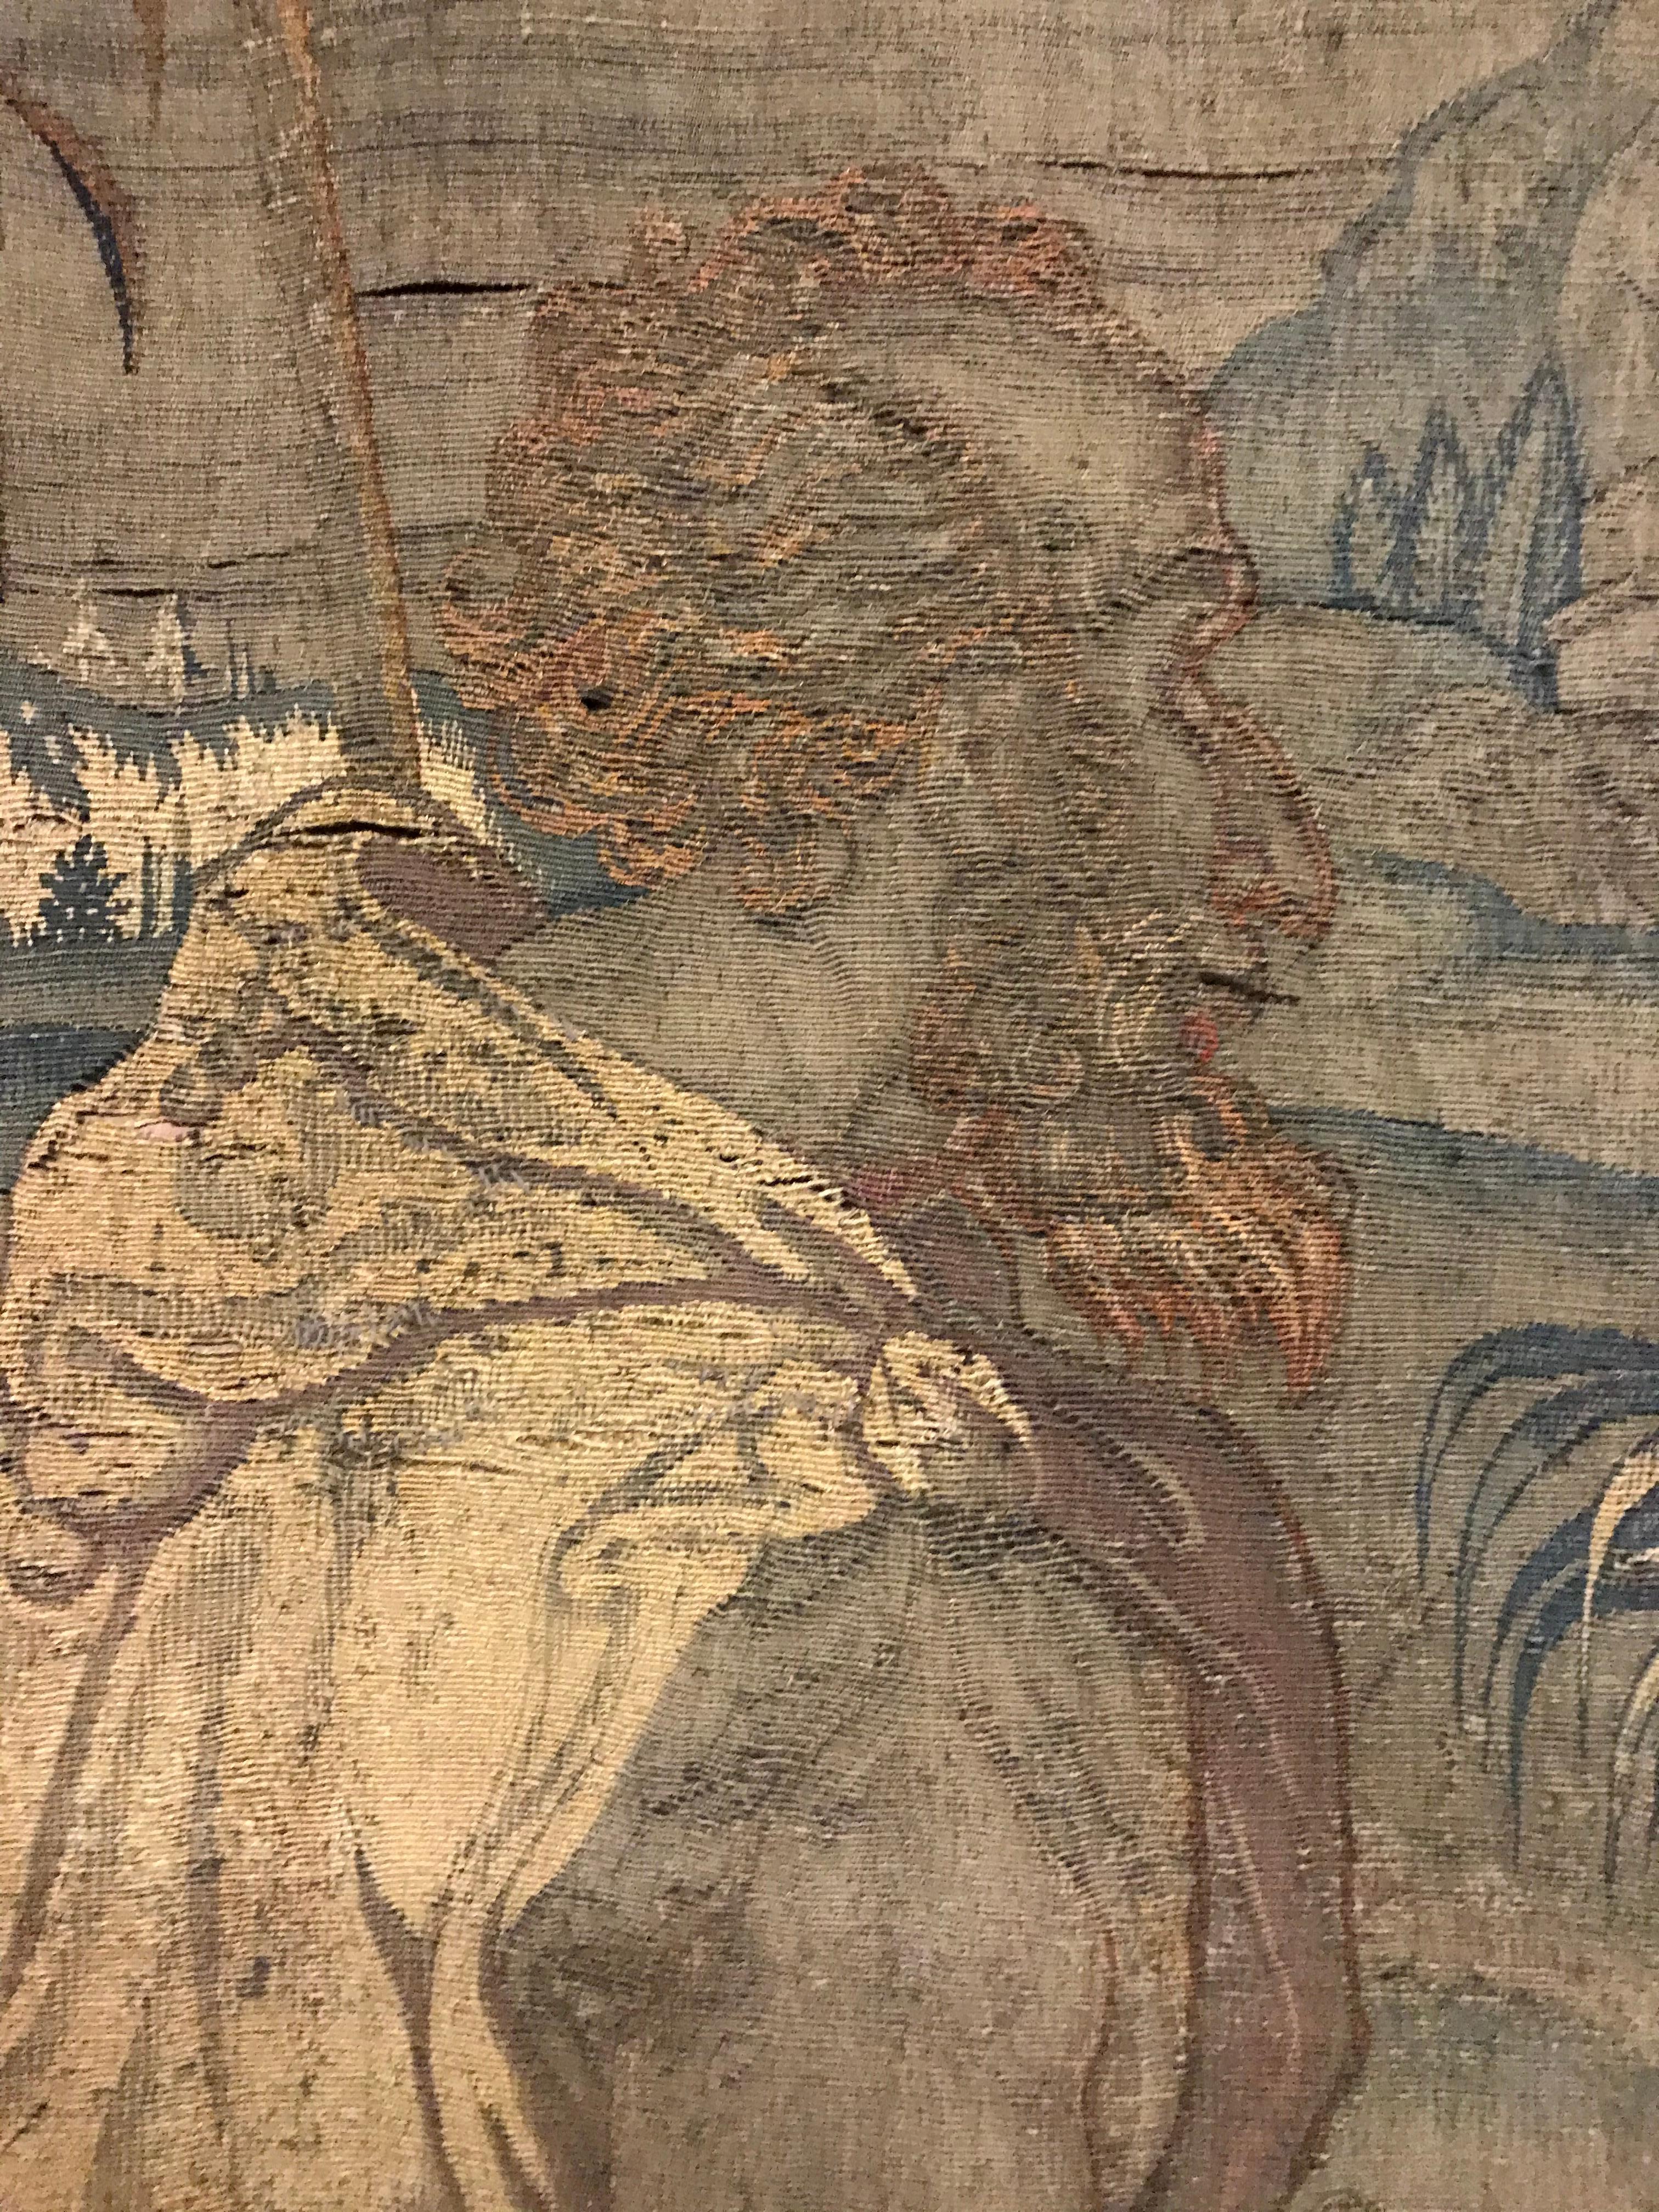 Museum Piece from the 16th-17th Century, Renaissance Style Tapestry Canvas 2